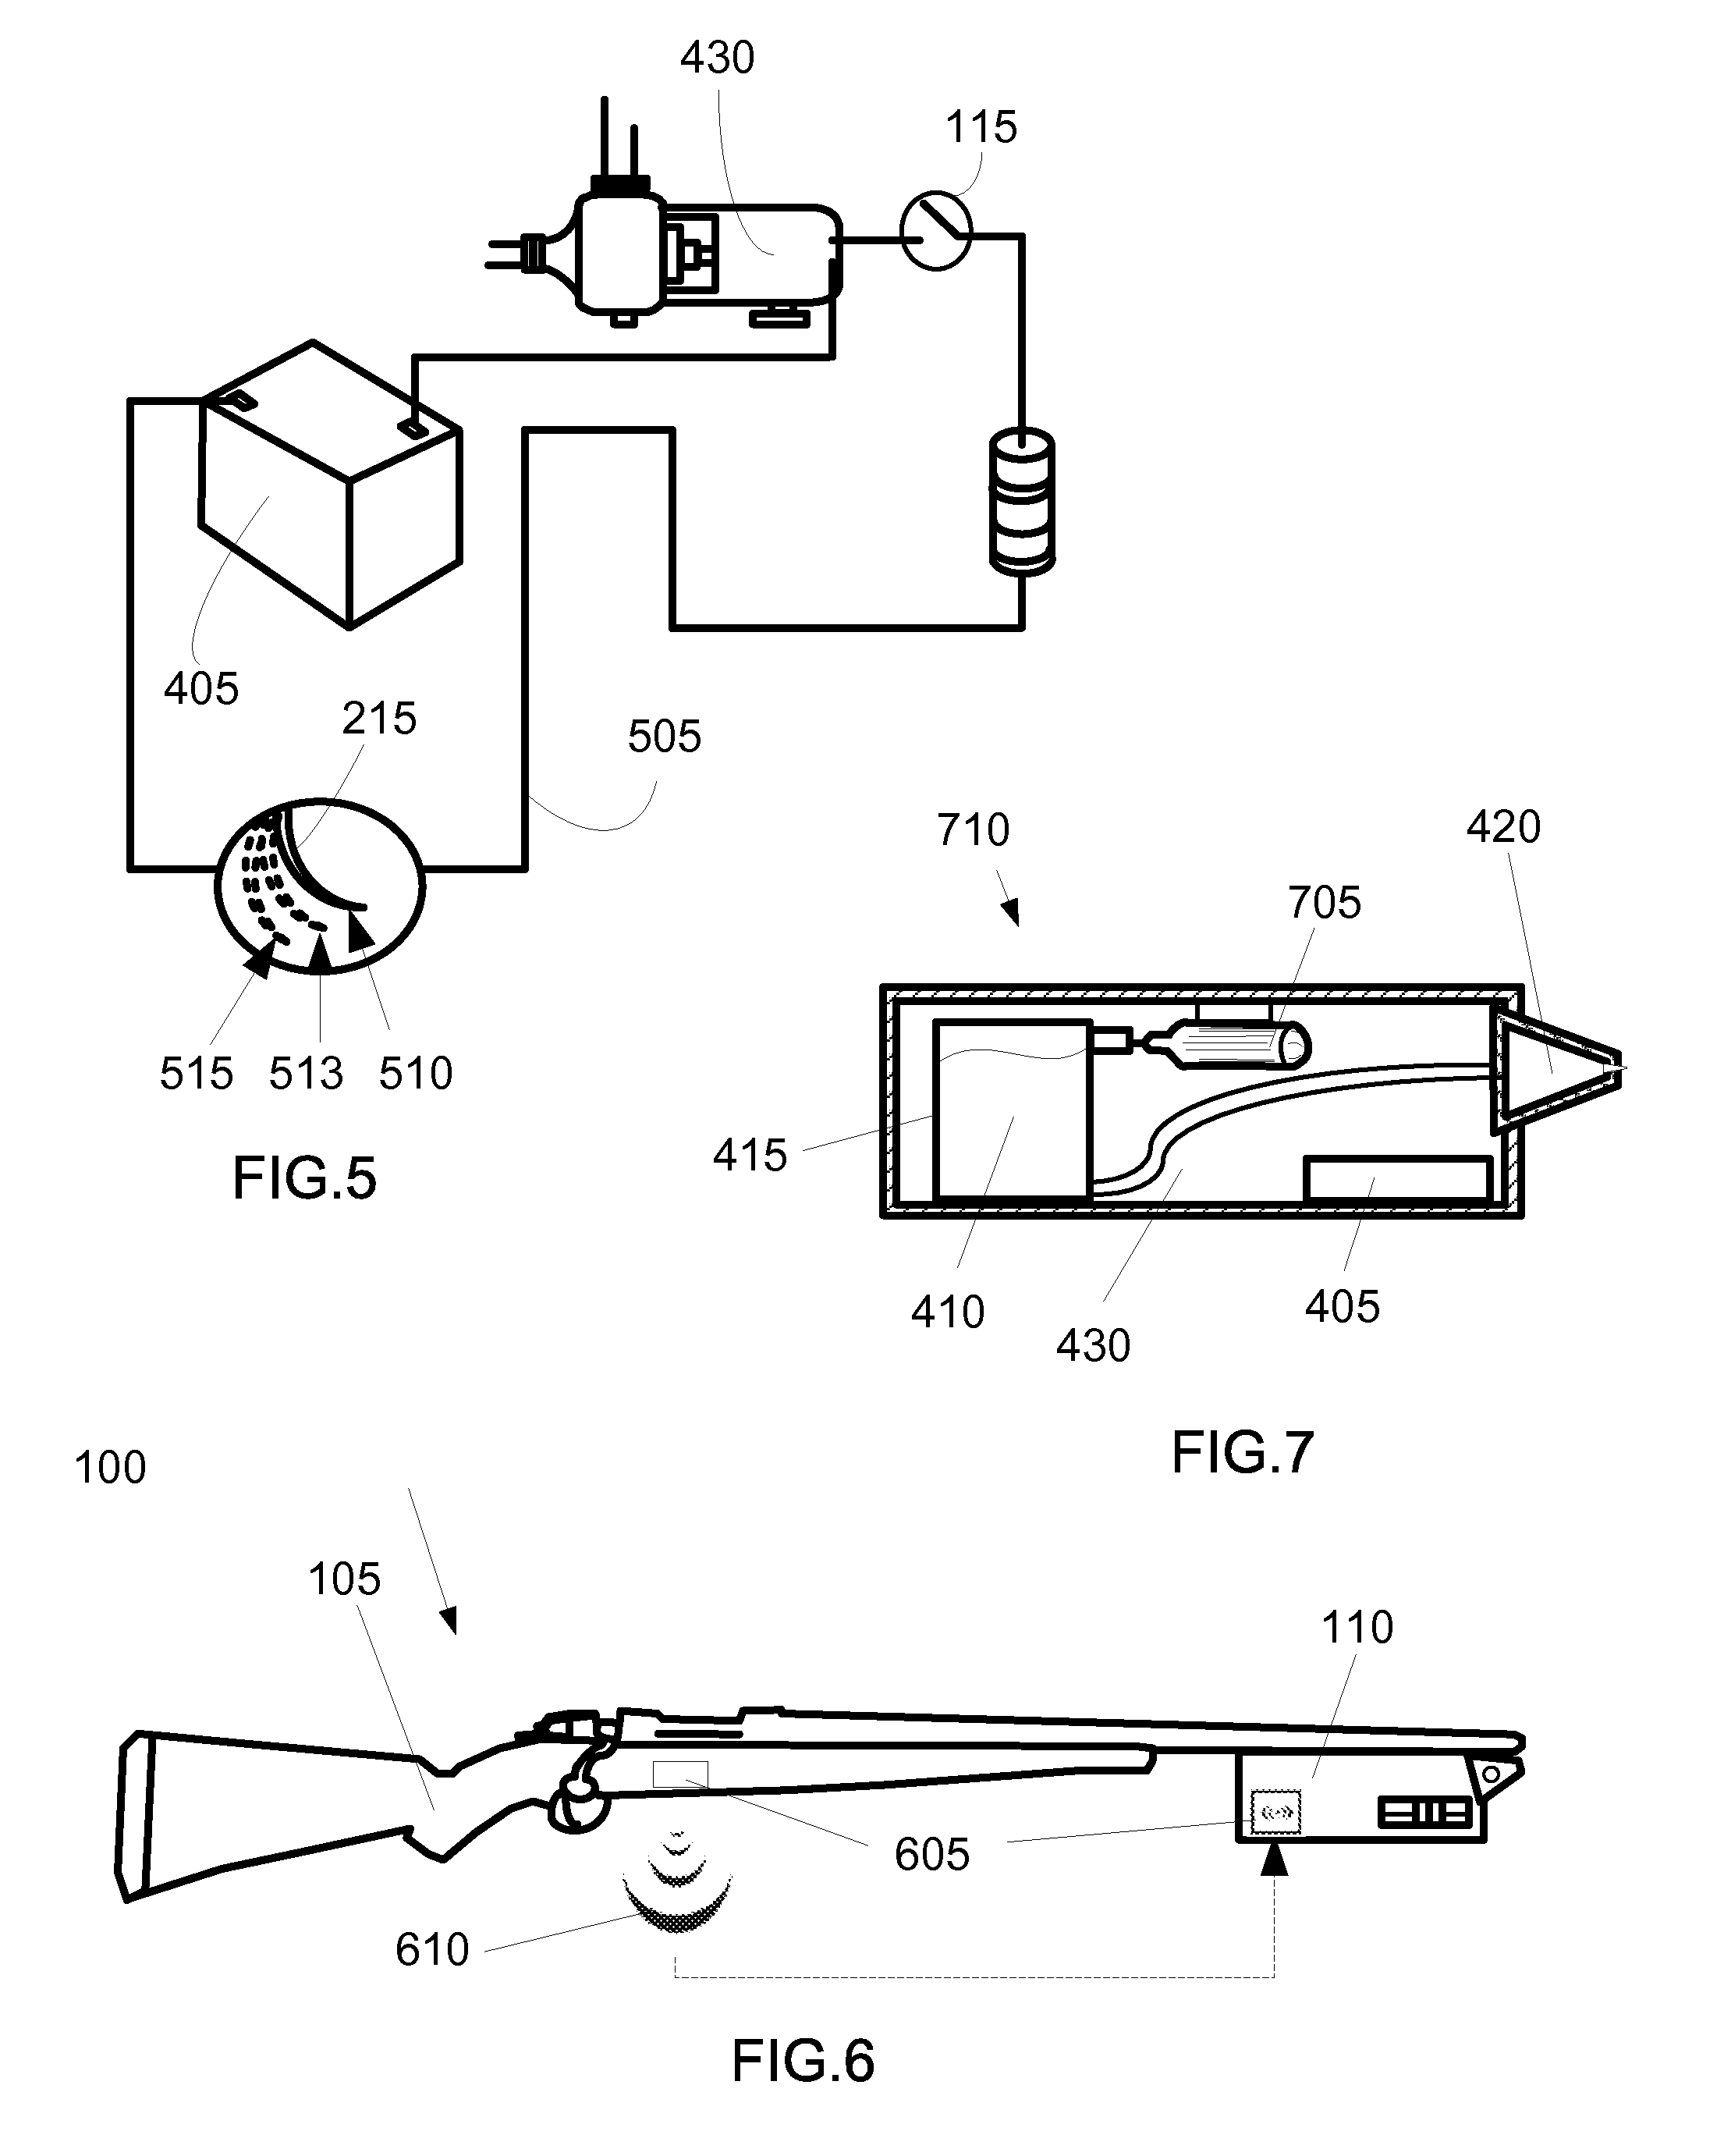 Firearm flame thrower combination